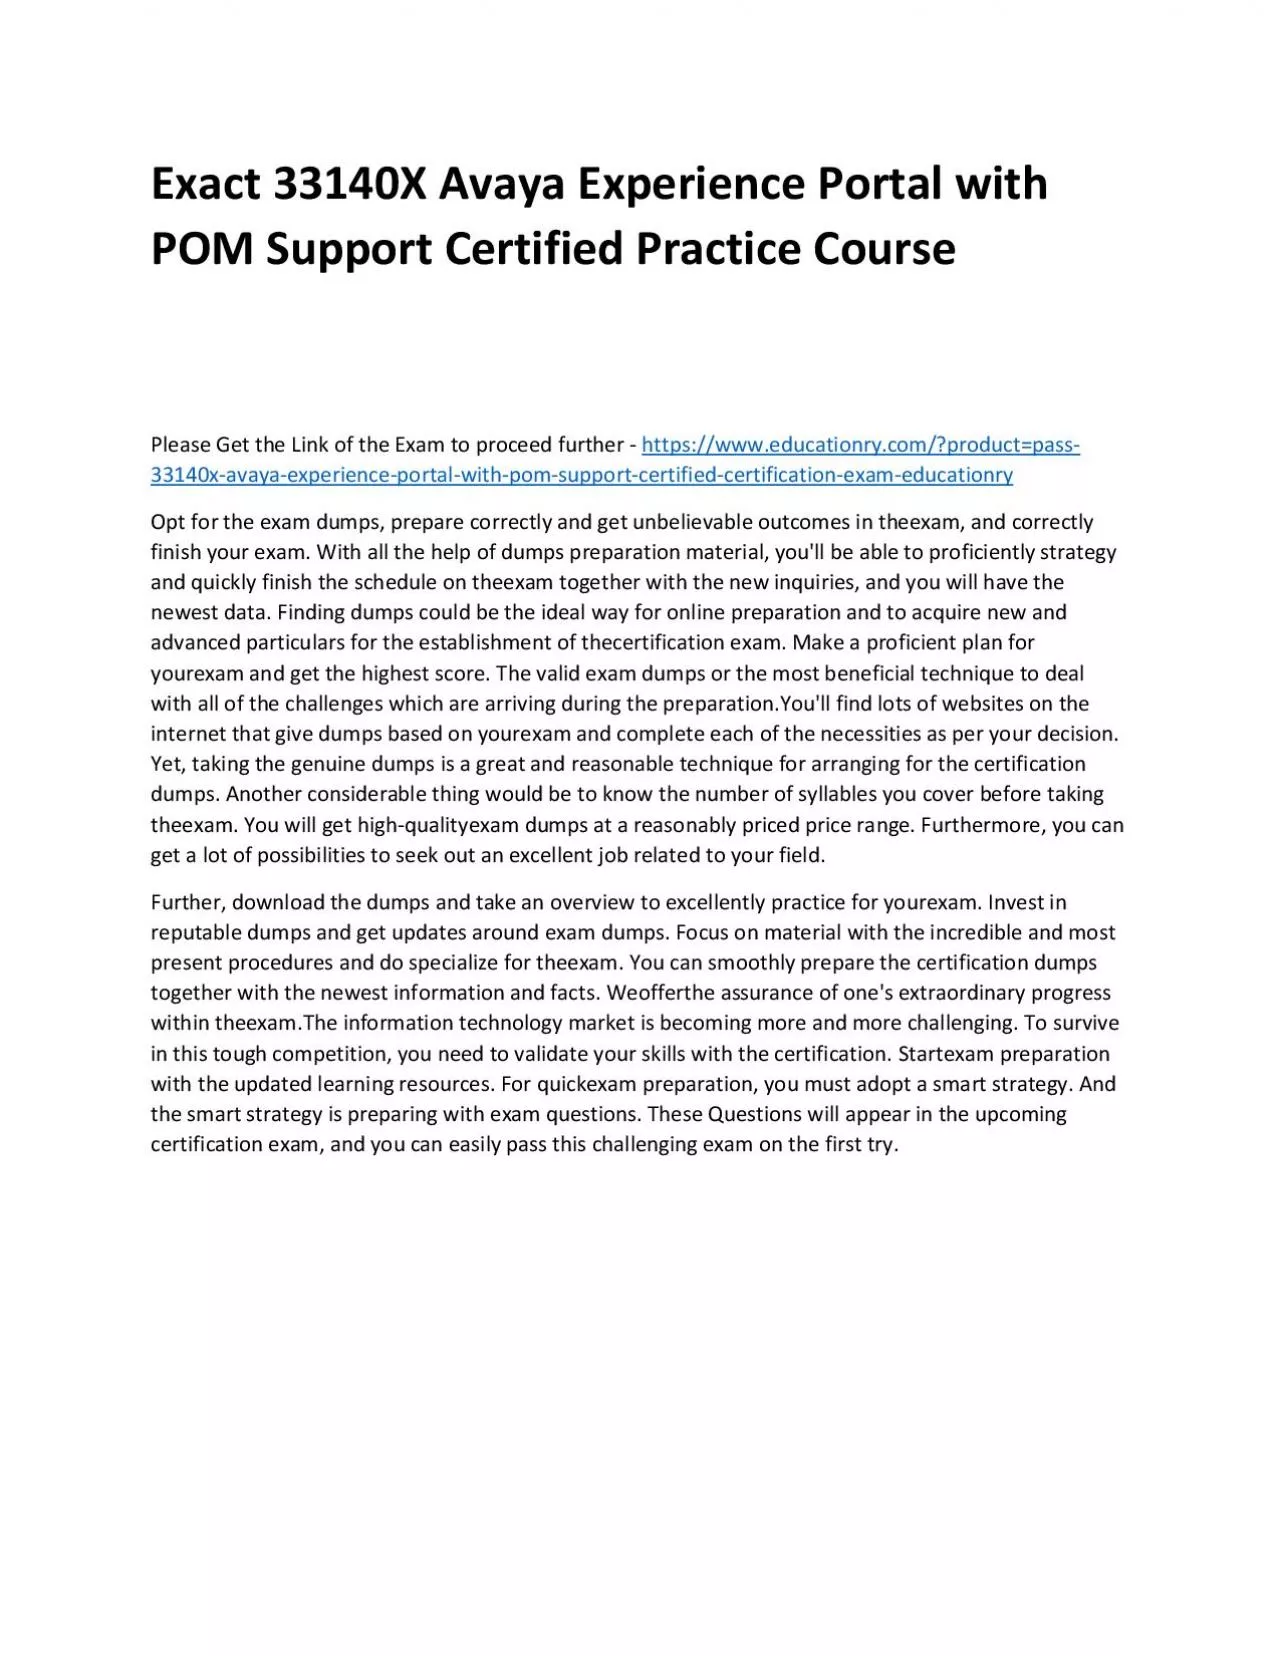 Exact 33140X Avaya Experience Portal with POM Support Certified Practice Course